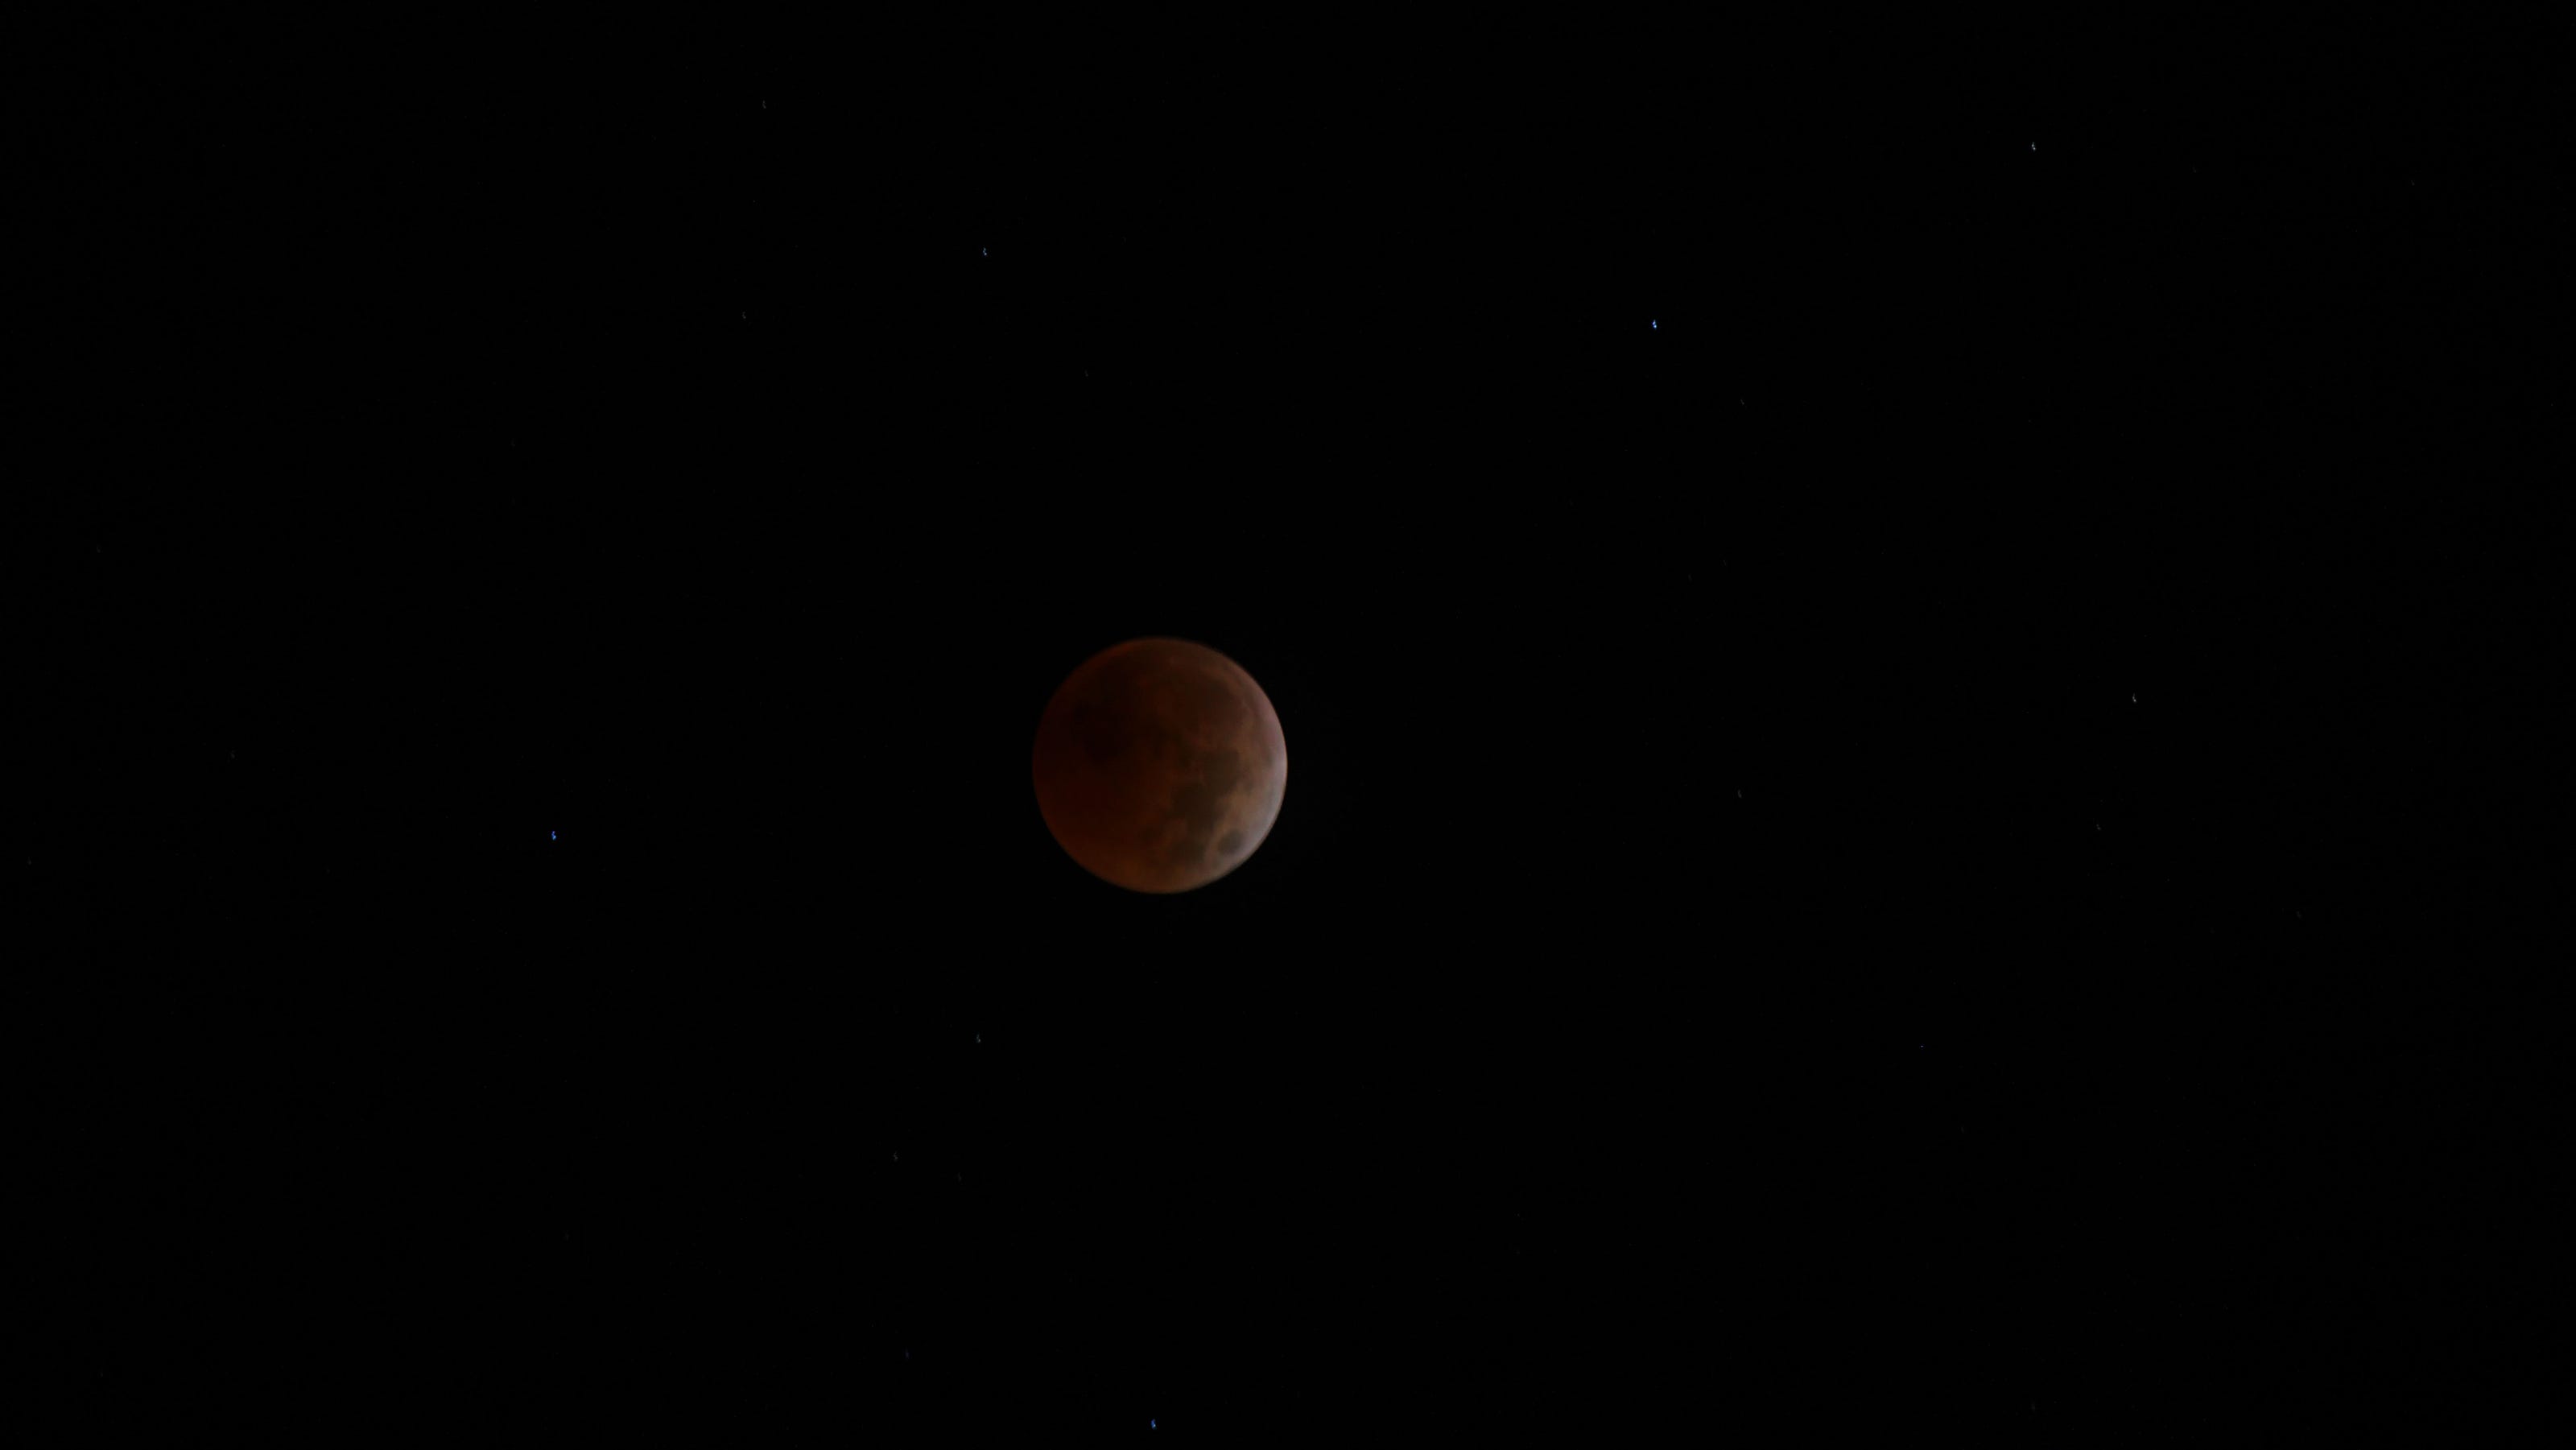 Today's total lunar eclipse is the last until 2025.